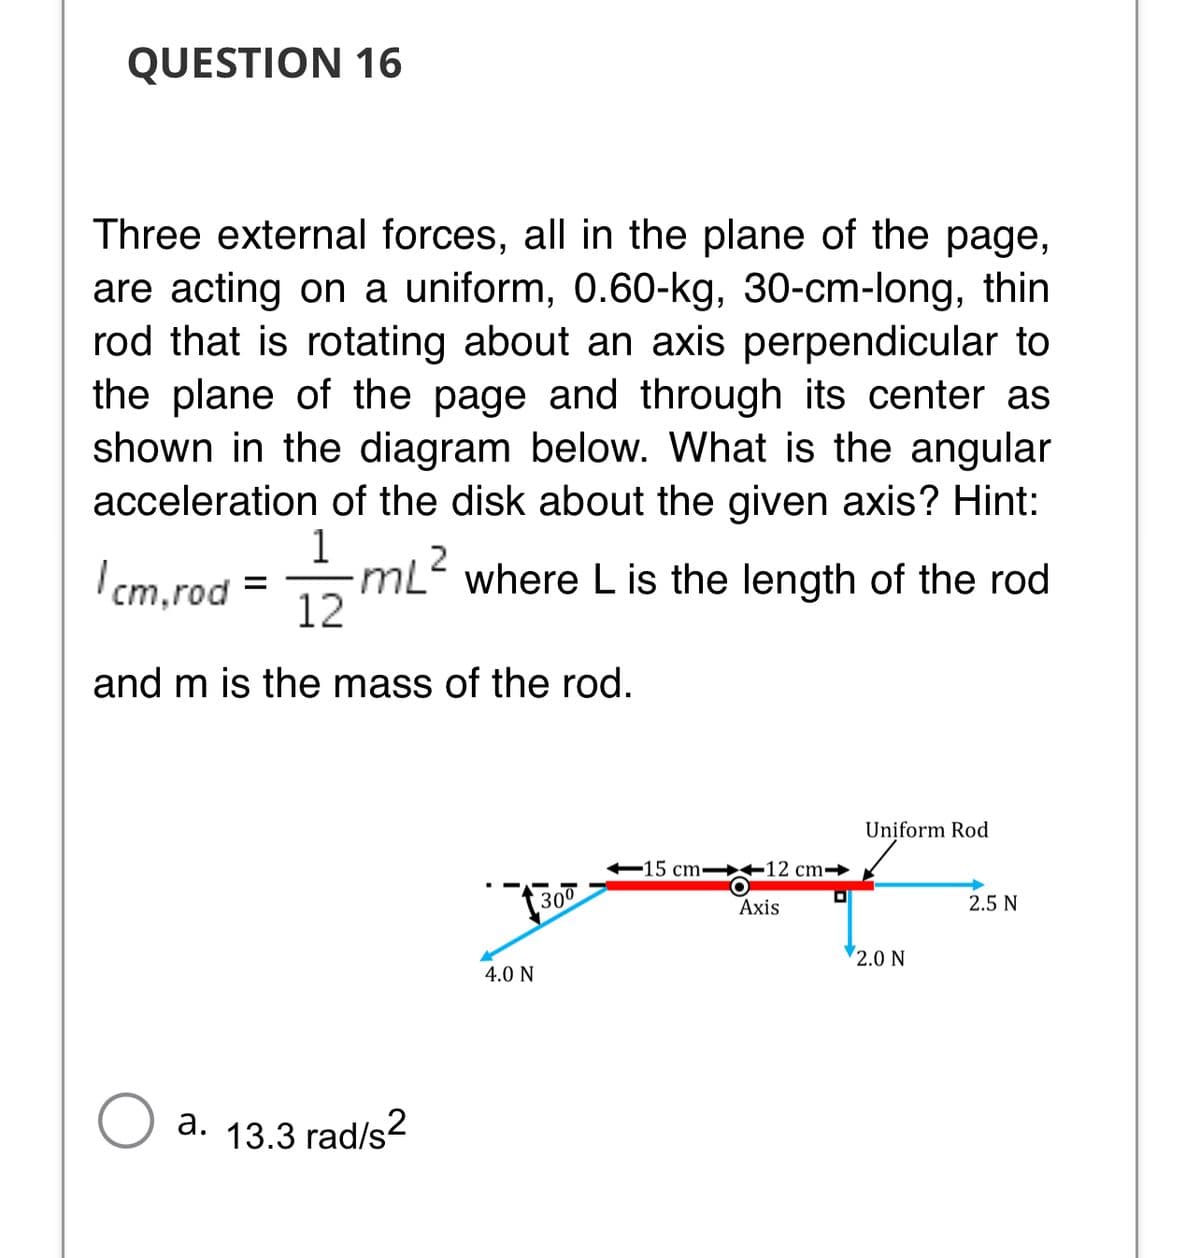 QUESTION 16
Three external forces, all in the plane of the page,
are acting on a uniform, 0.60-kg, 30-cm-long, thin
rod that is rotating about an axis perpendicular to
the plane of the page and through its center as
shown in the diagram below. What is the angular
acceleration of the disk about the given axis? Hint:
1
mL where L is the length of the rod
12
2
I cm,rod
and m is the mass of the rod.
Uniform Rod
-15 cm→ +12 cm¬
300
2.5 N
Axis
2.0 N
4.0 N
a. 13.3 rad/s
2
